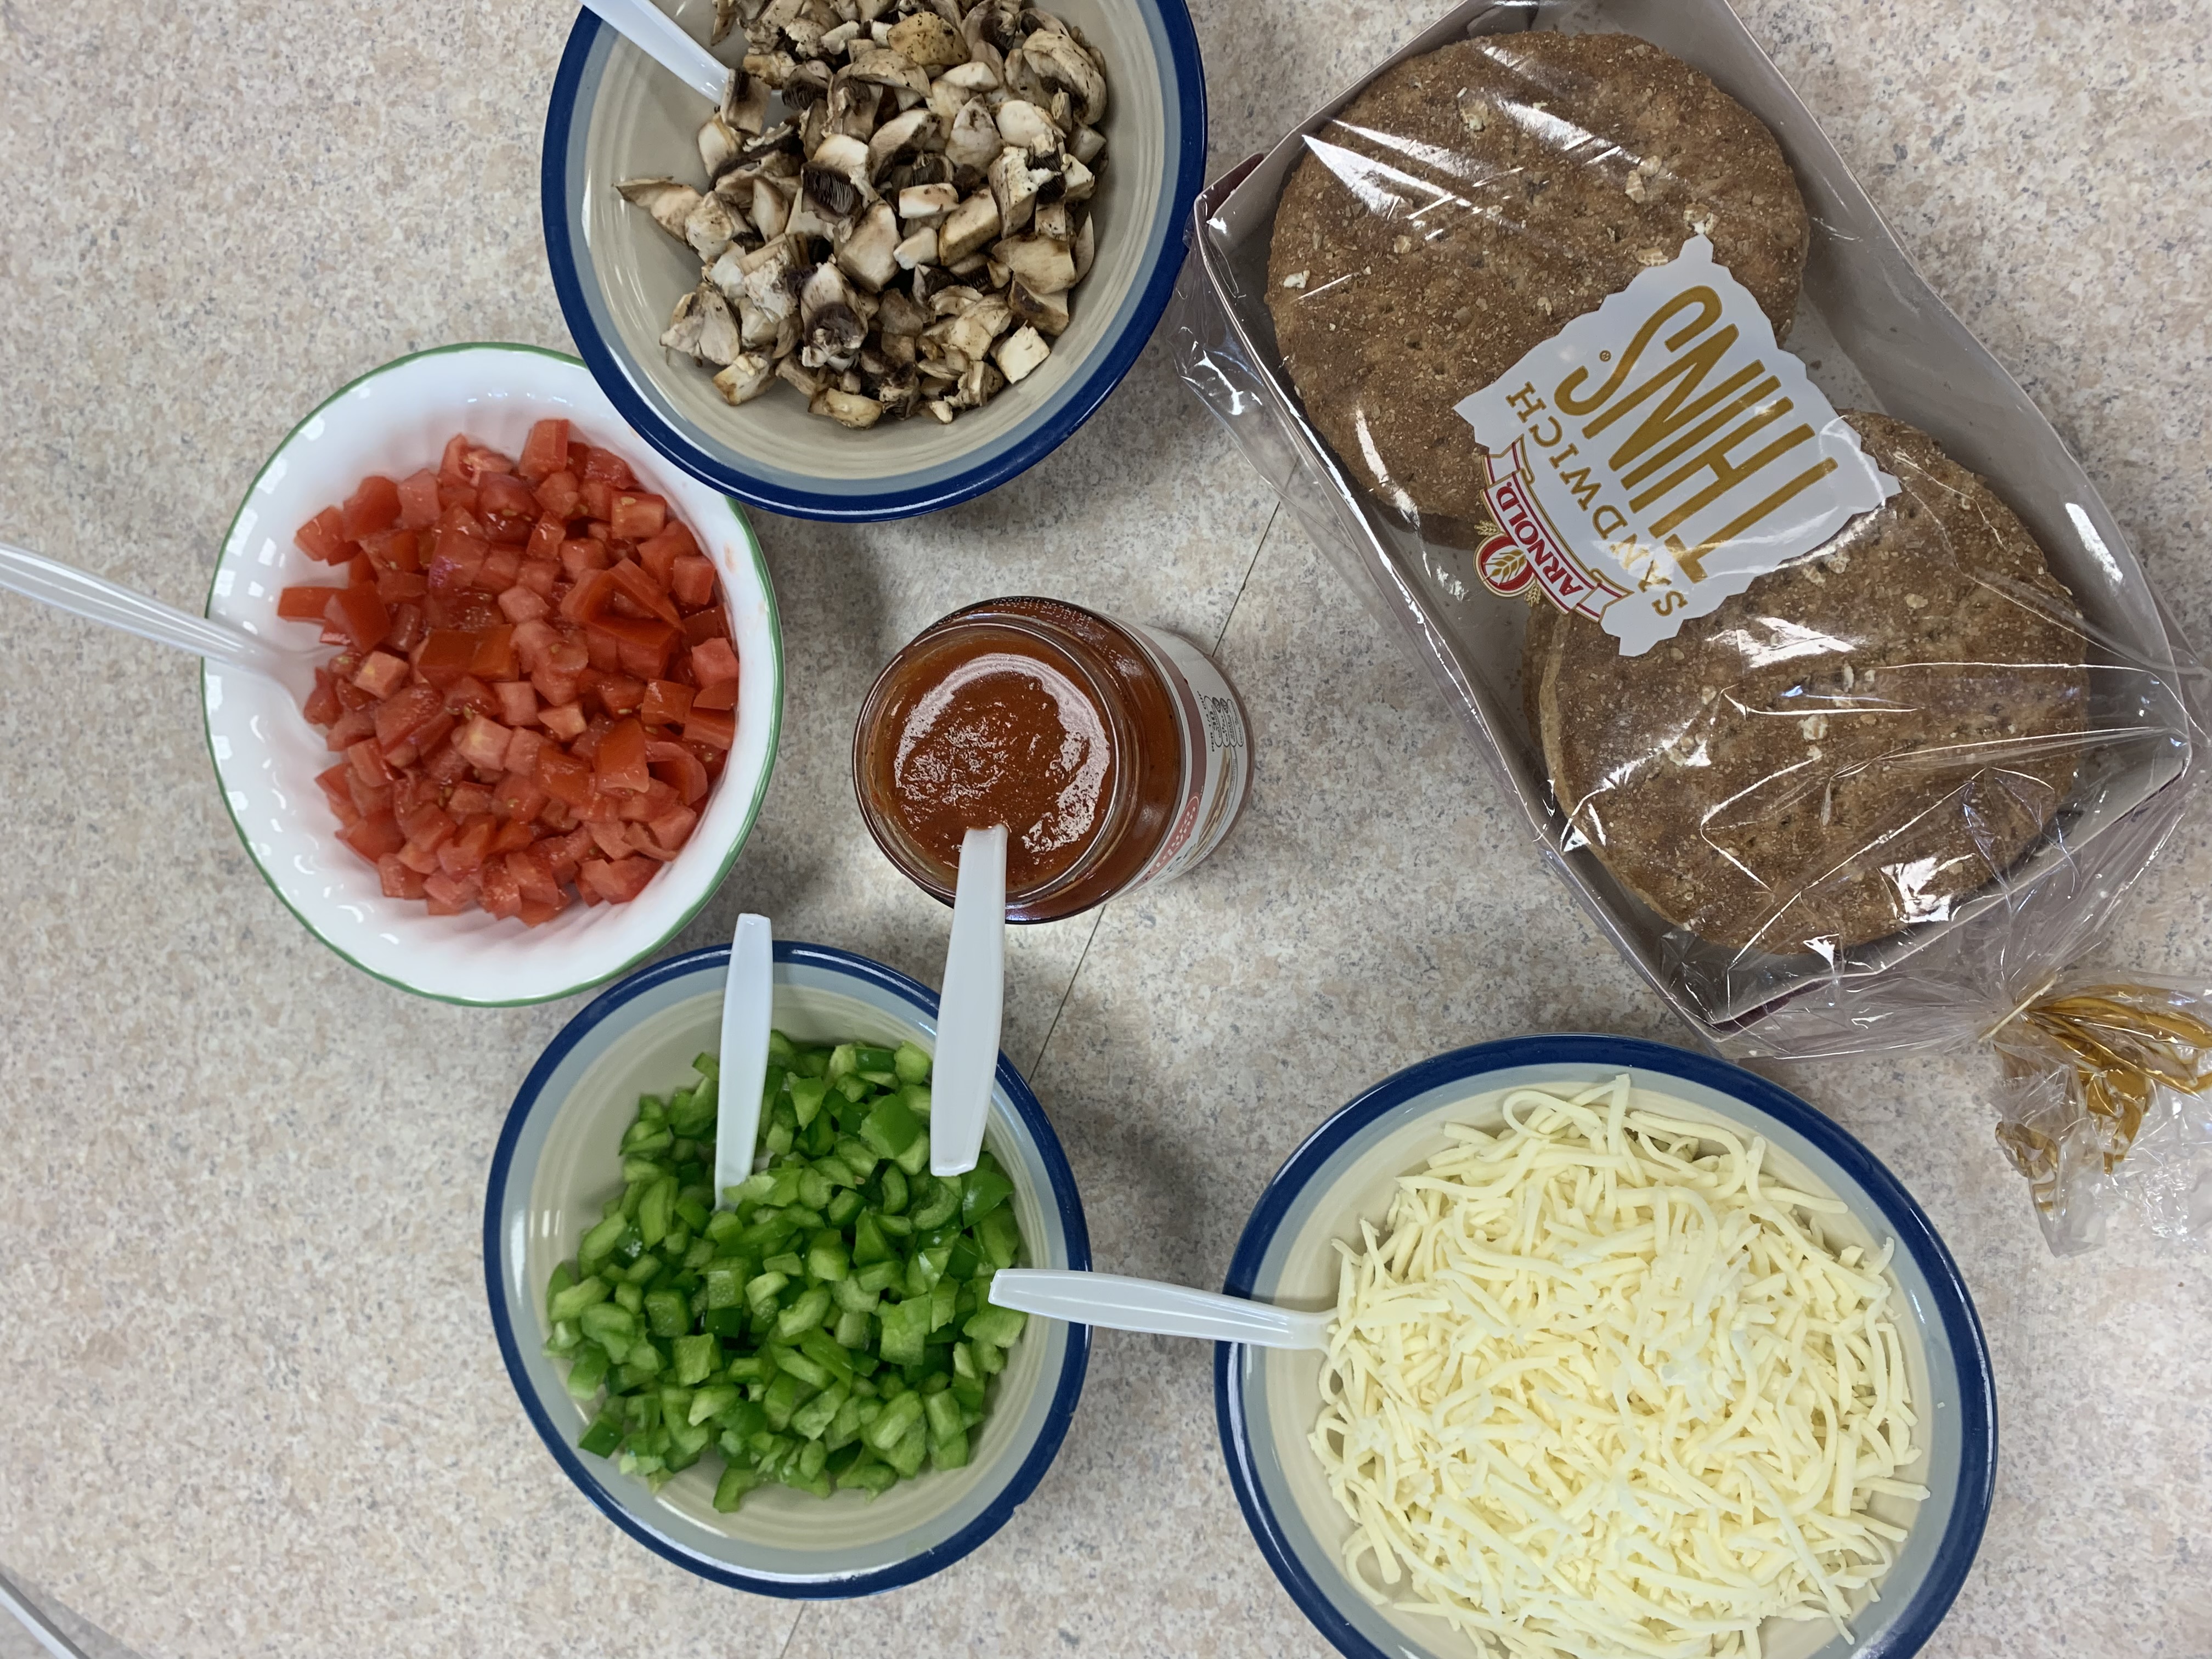 Ingredients for making pizza in bowls.